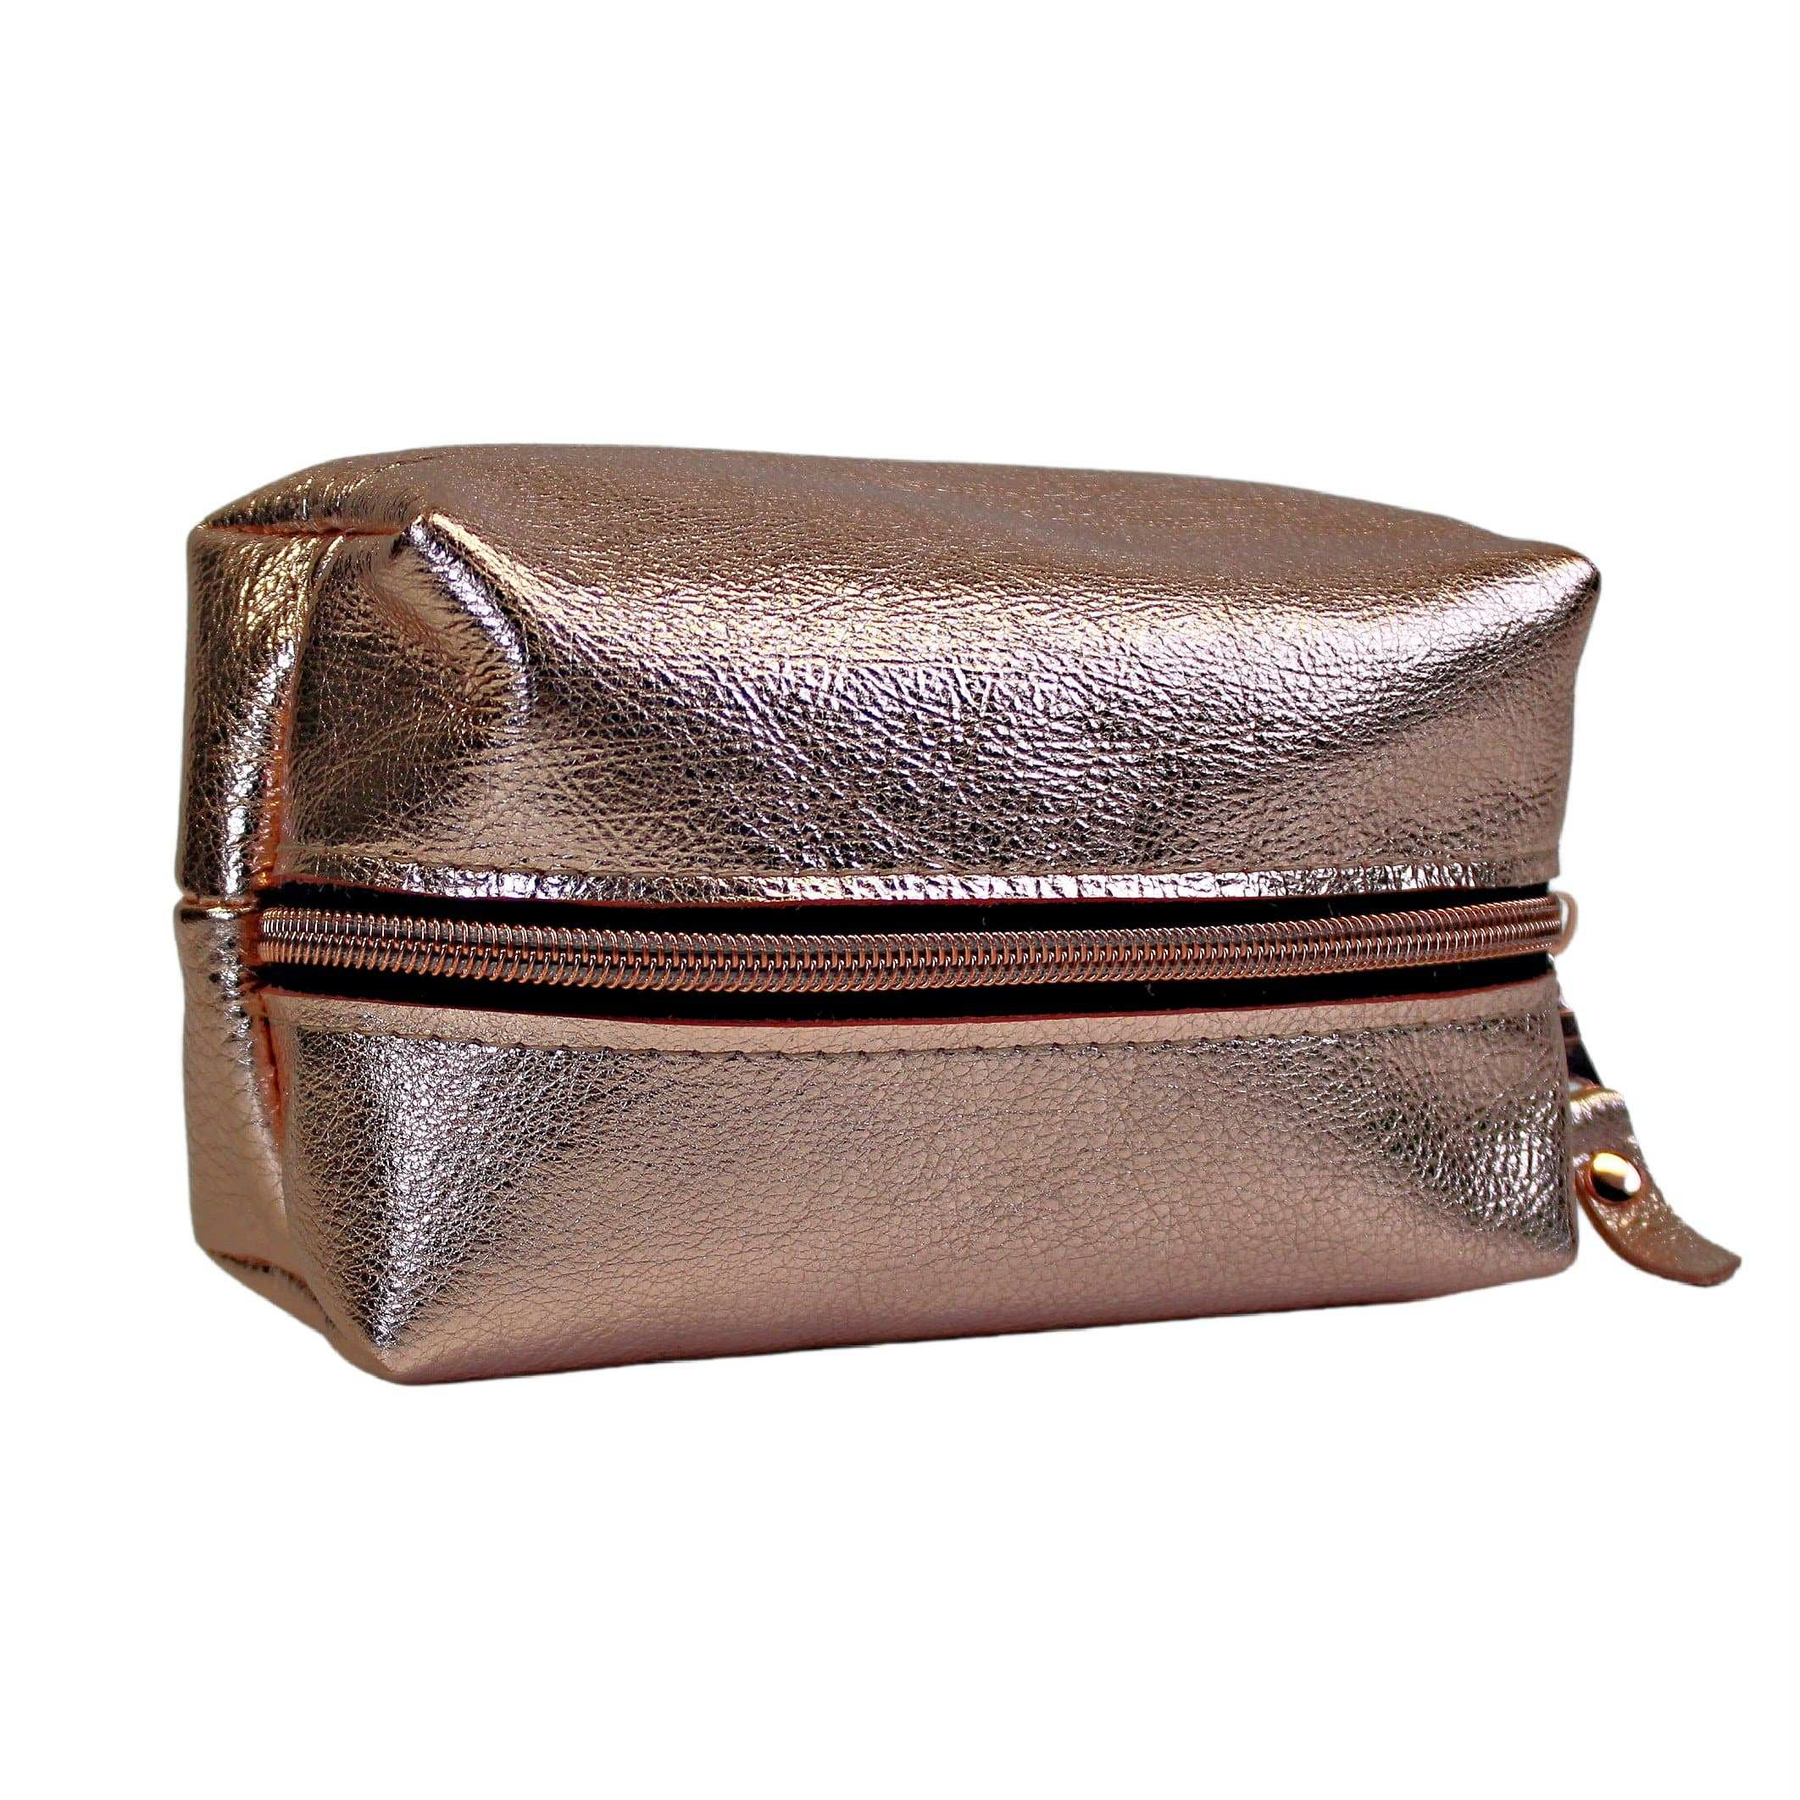 Dome Cosmetic Case | Rose Gold Metallic Leather – Graphic Image